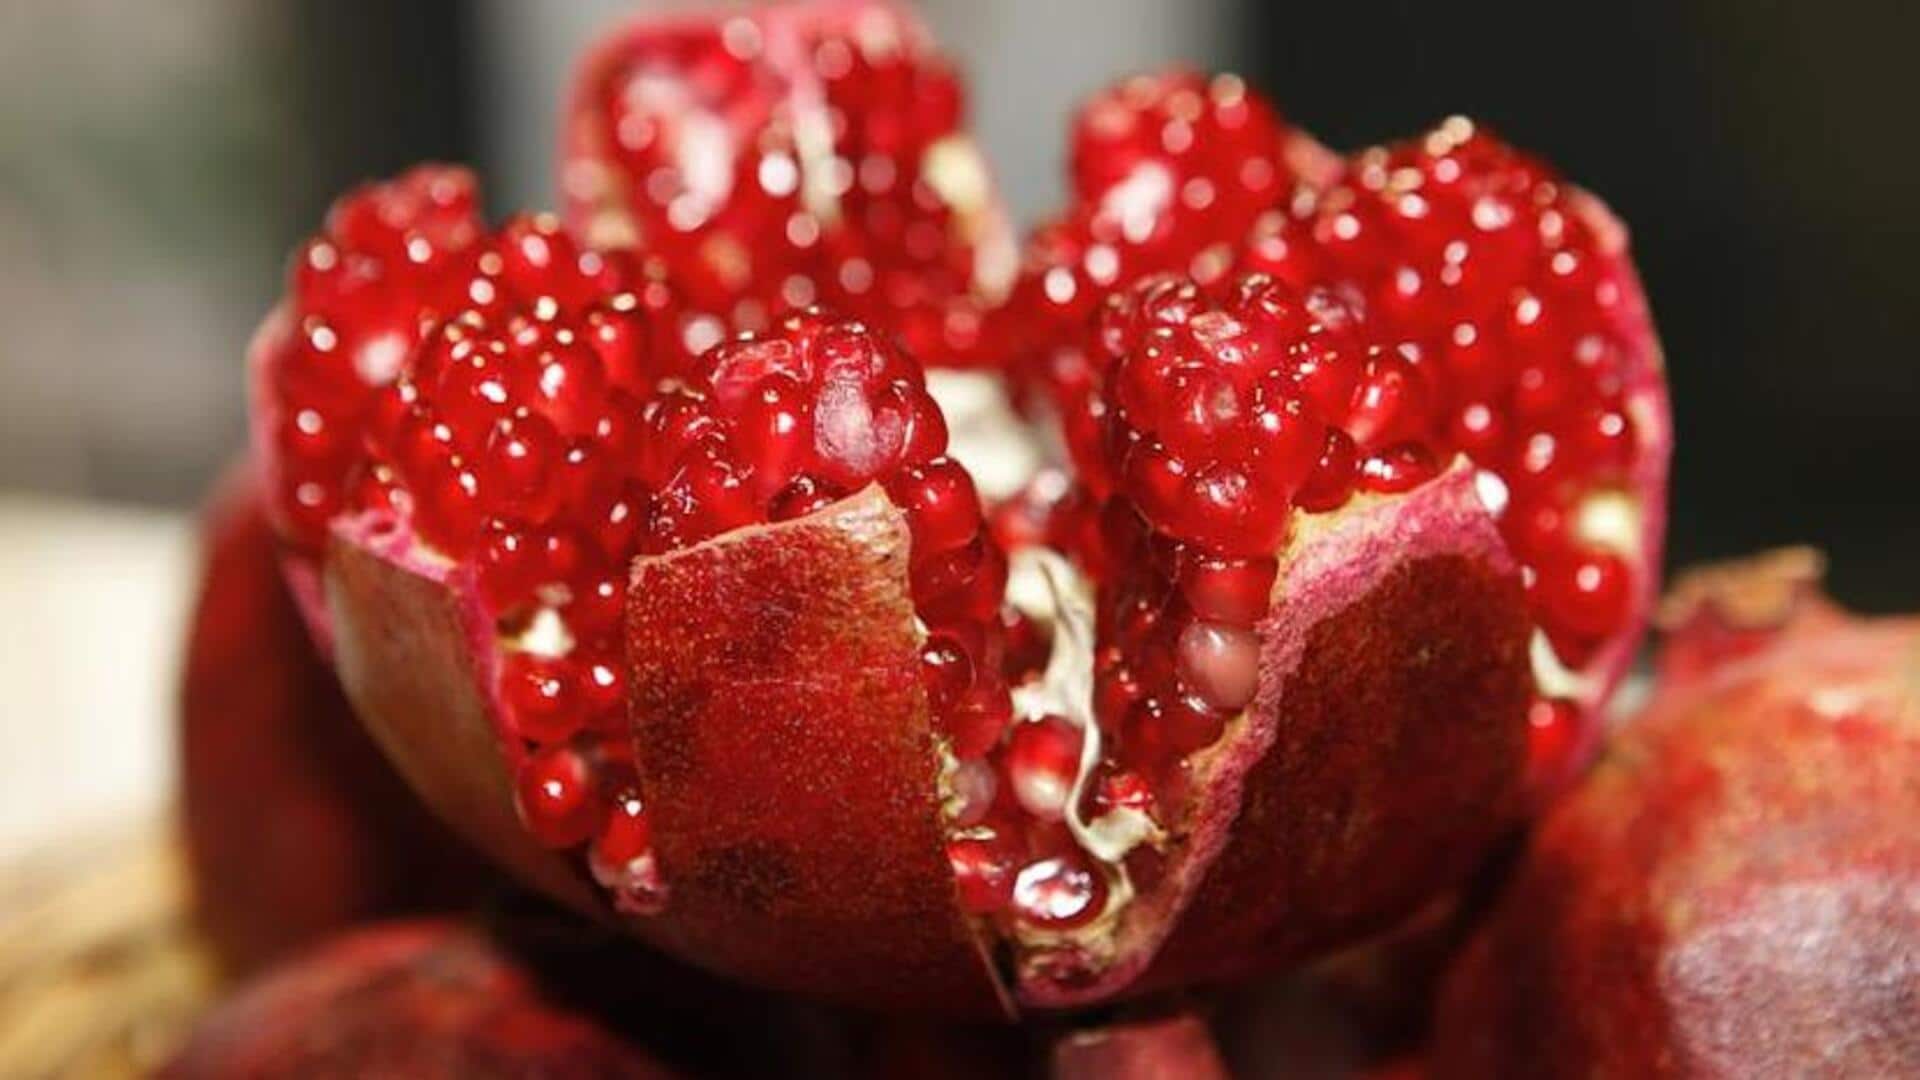 Pomegranate-infused beverages that offer youthful skin and hair